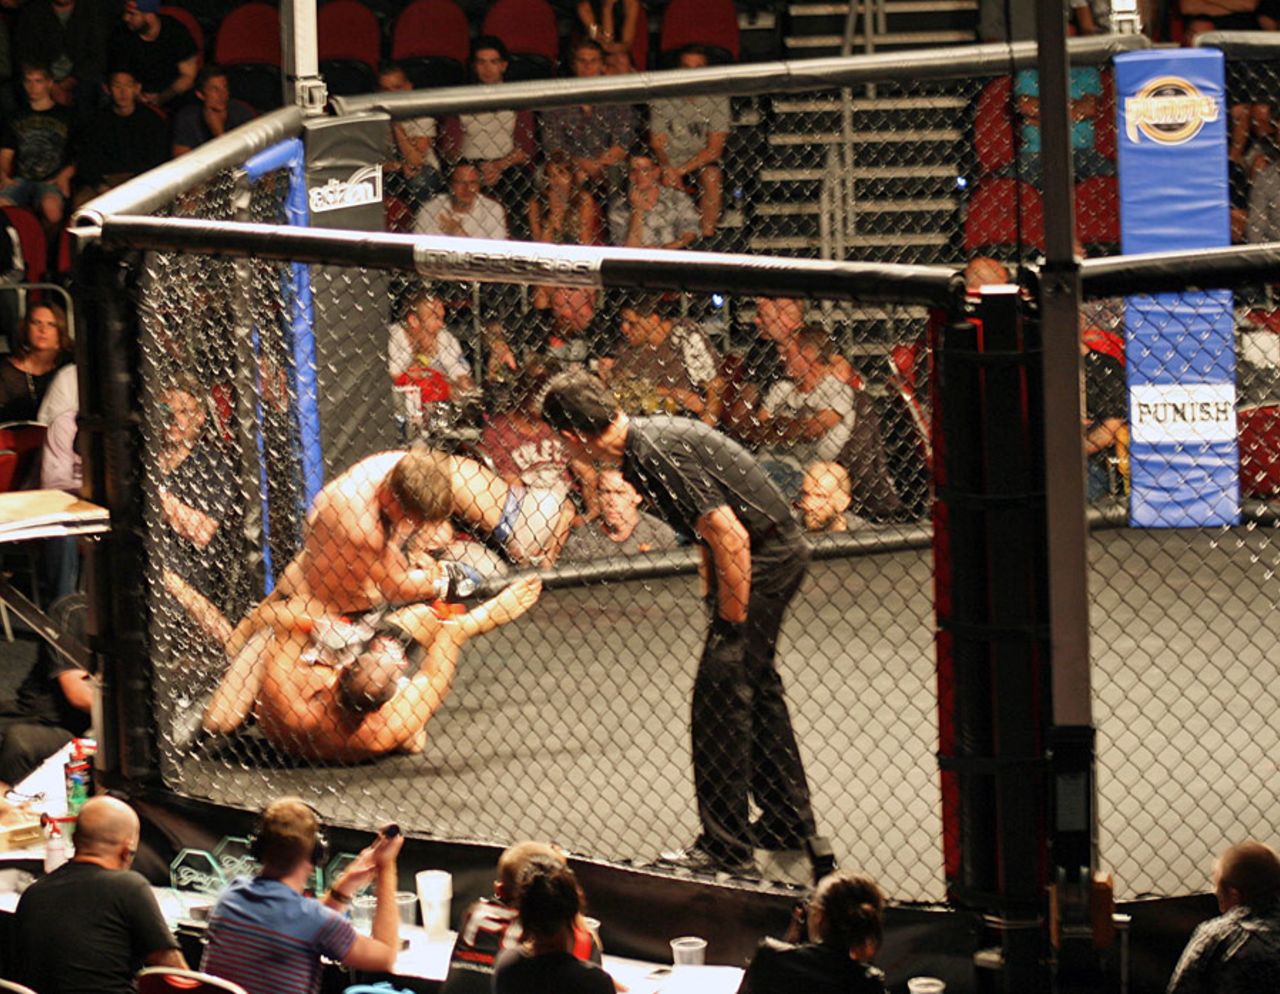 Adam Hollioake (bottom) in a mixed martial arts cage fight, Gold Coast, May 5, 2012